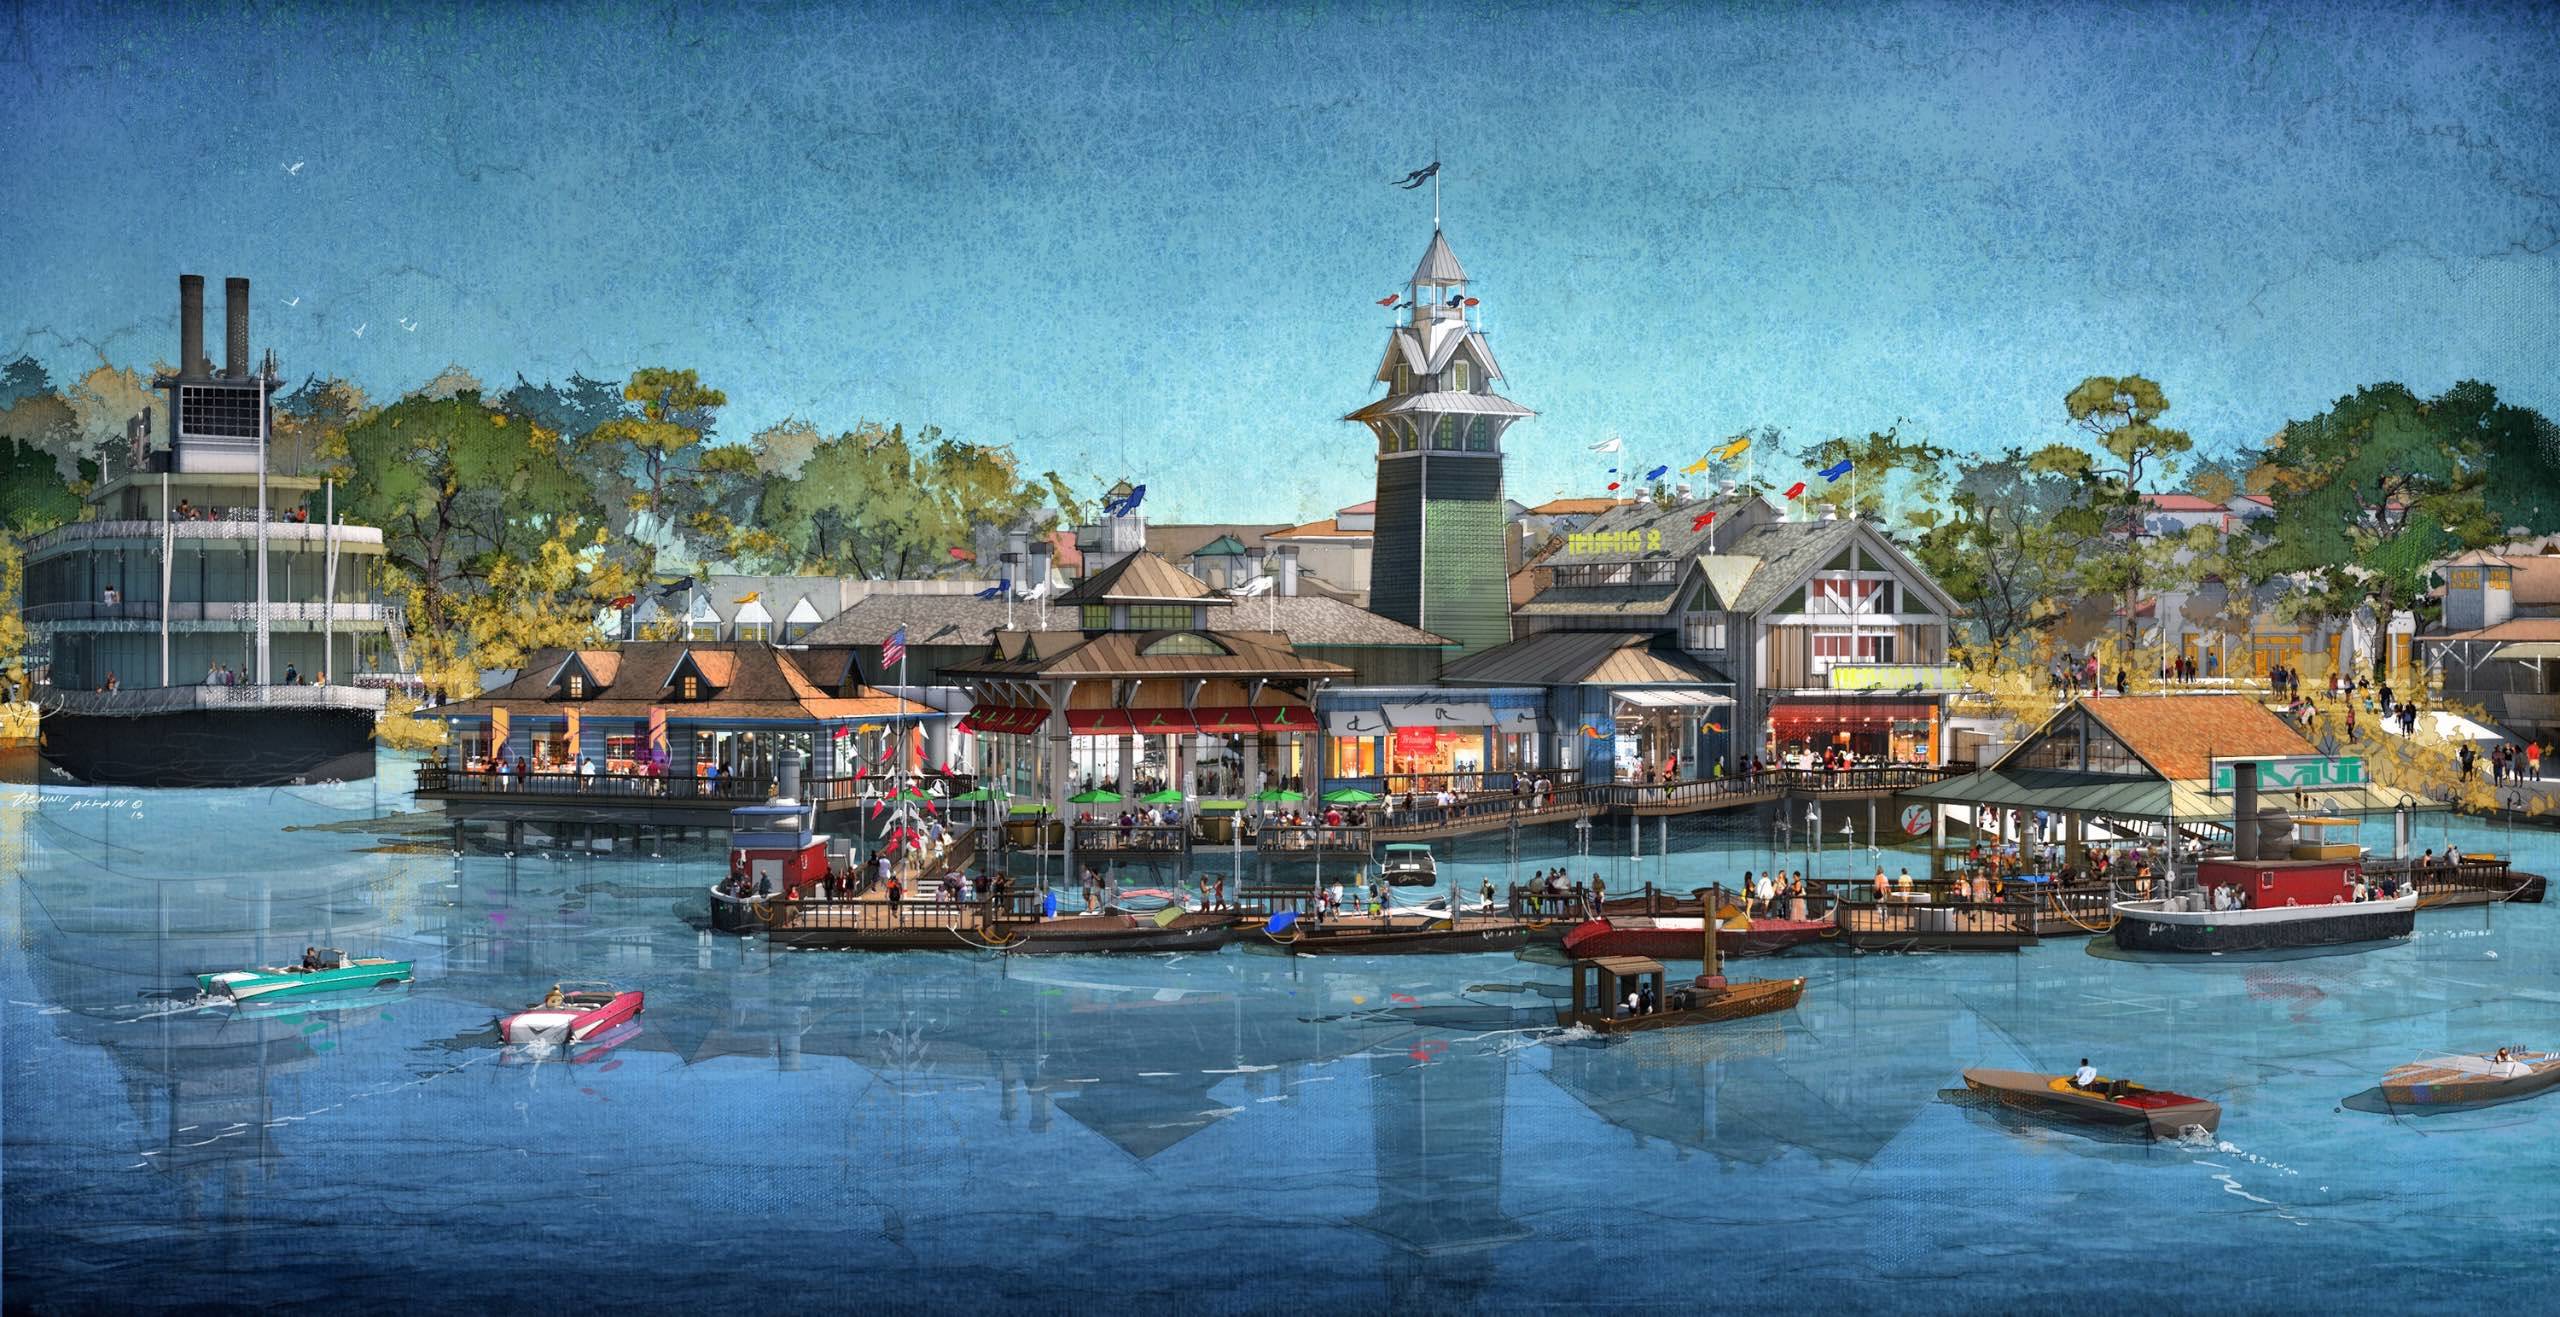 The BOATHOUSE concept art